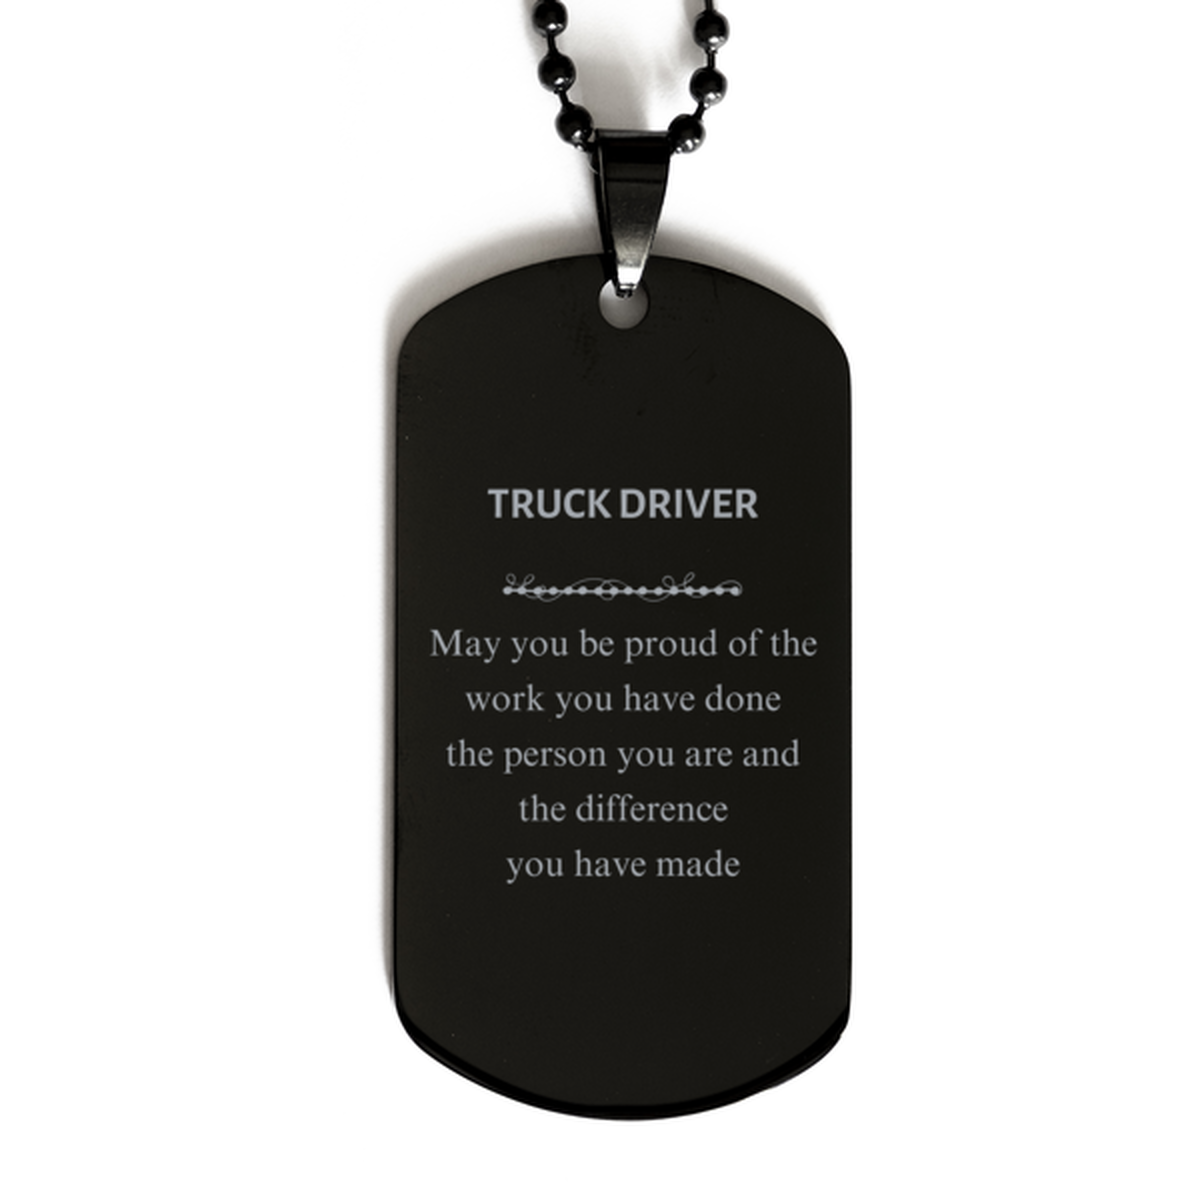 Truck Driver May you be proud of the work you have done, Retirement Truck Driver Black Dog Tag for Colleague Appreciation Gifts Amazing for Truck Driver